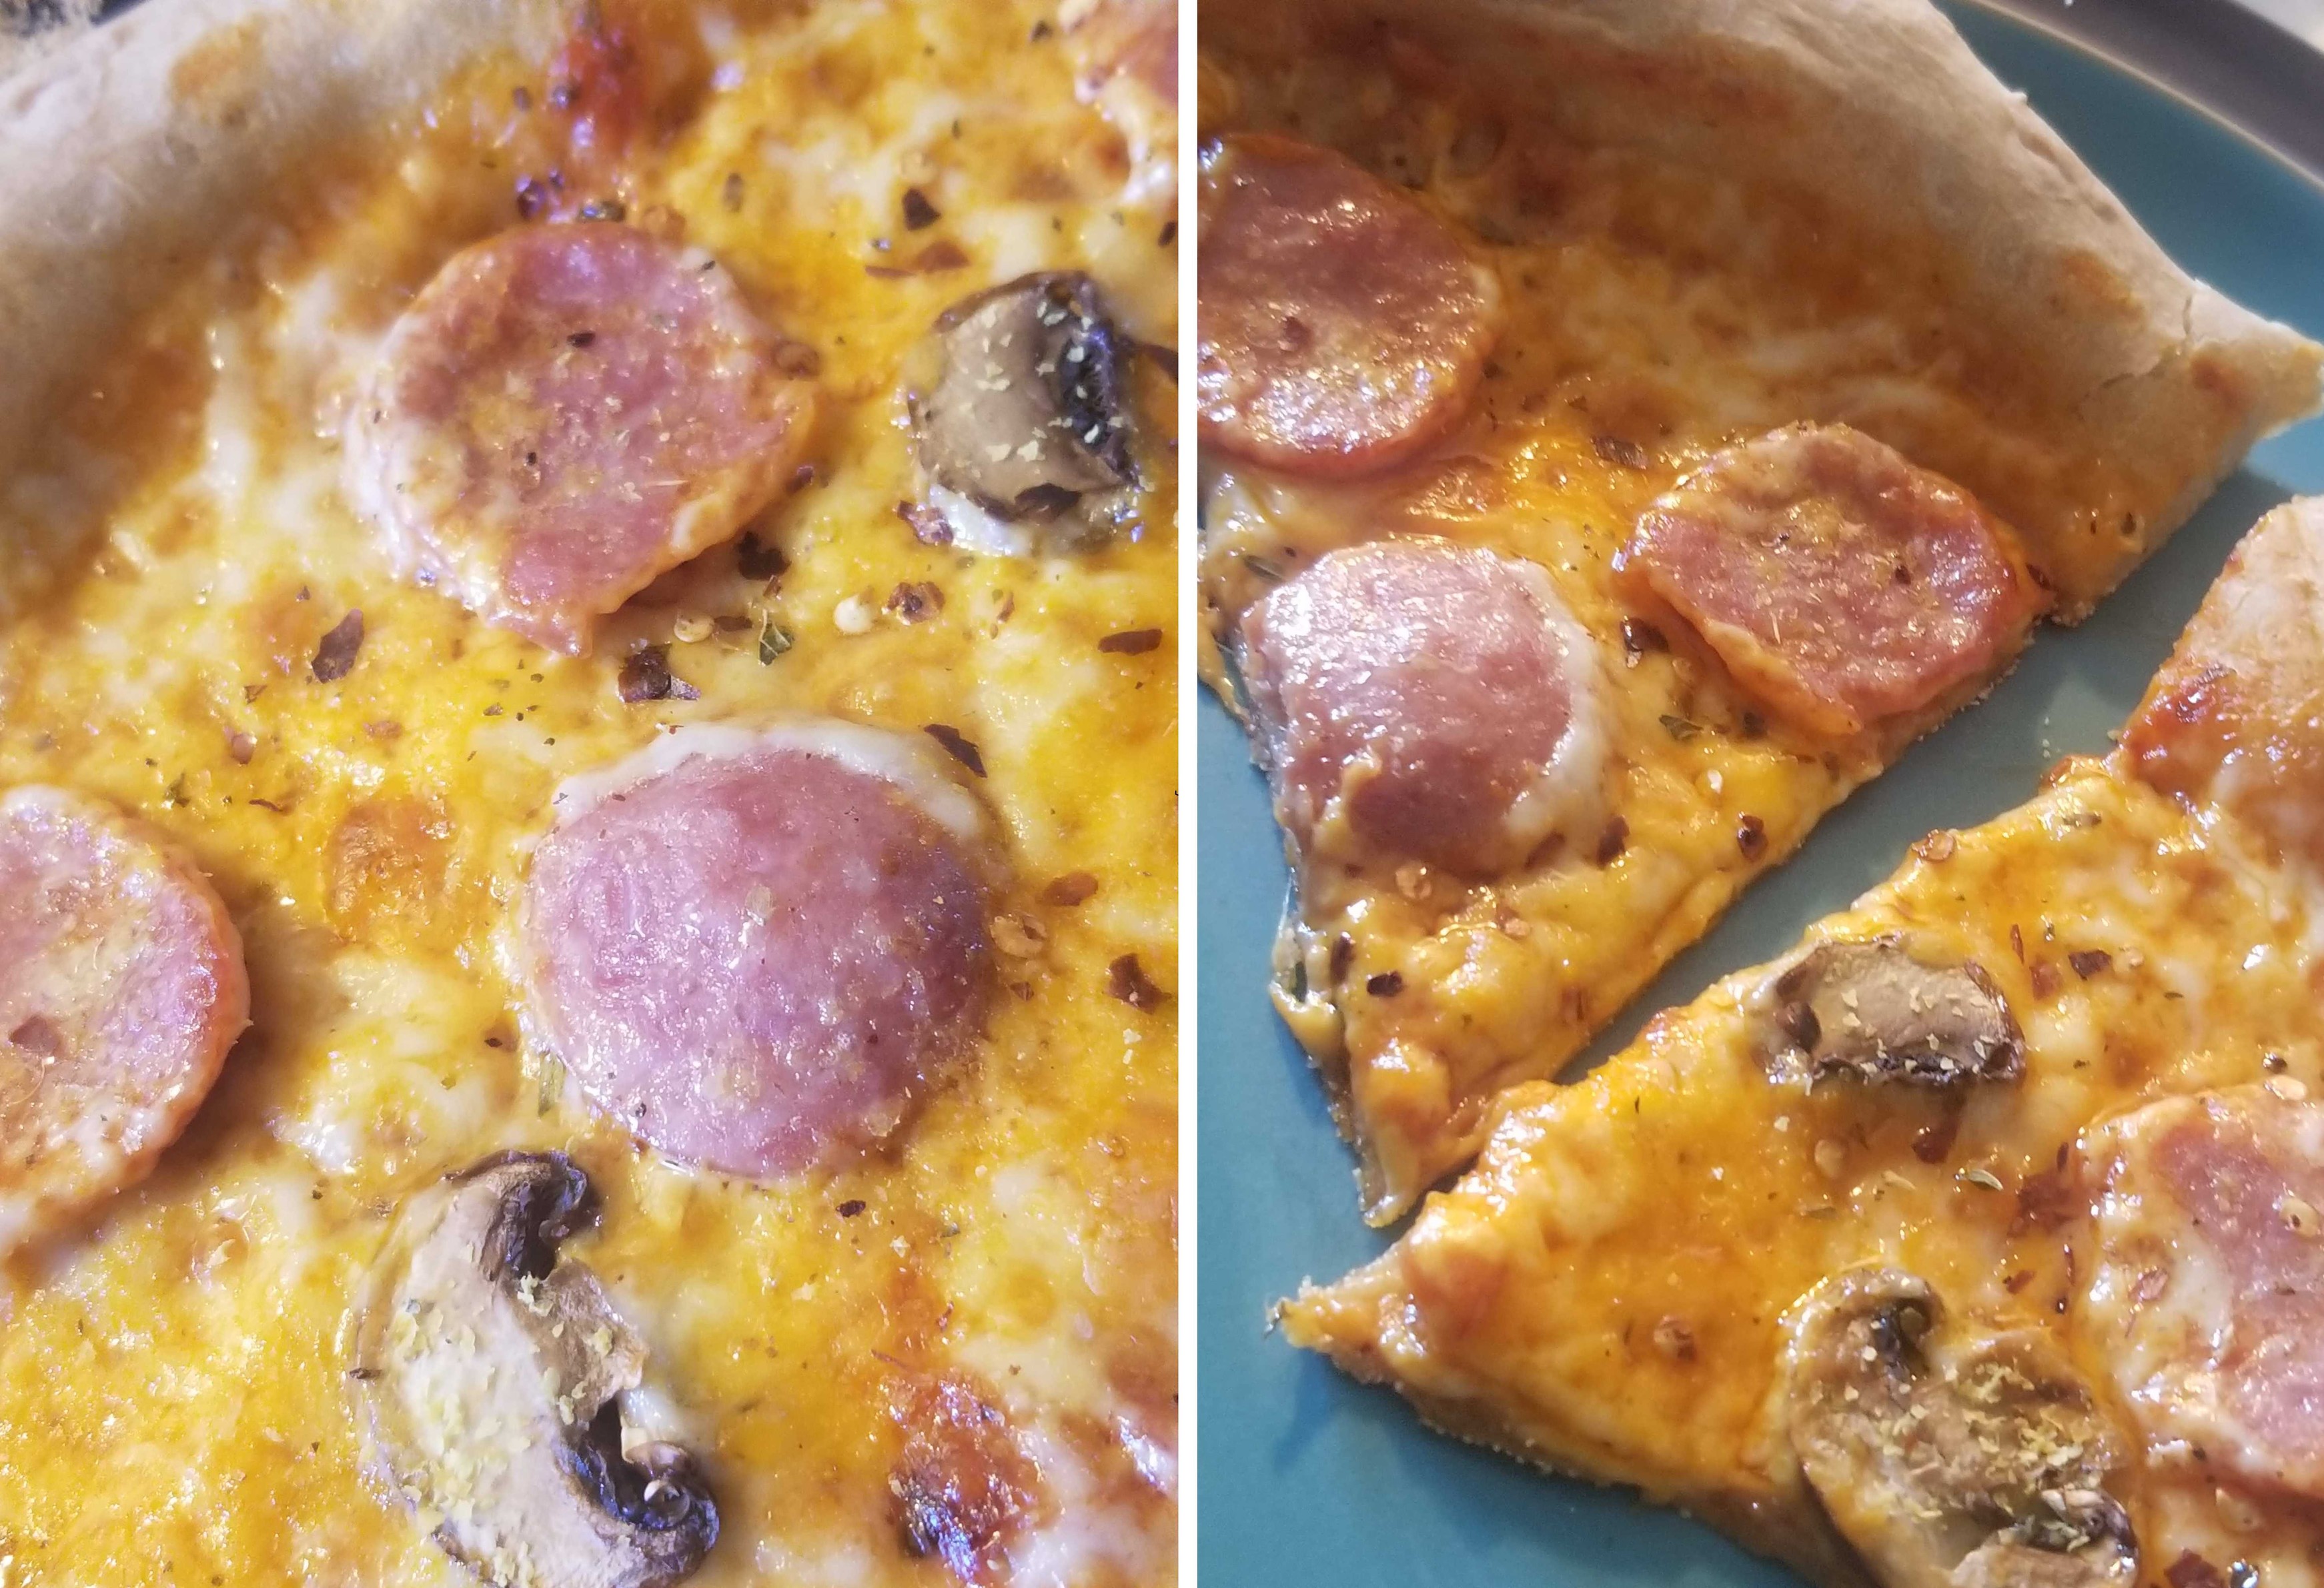 2 pictures side-by-side. Pic 1 is a close up of the pizza. Pic 2 is slices of the pizza on a blue plate.